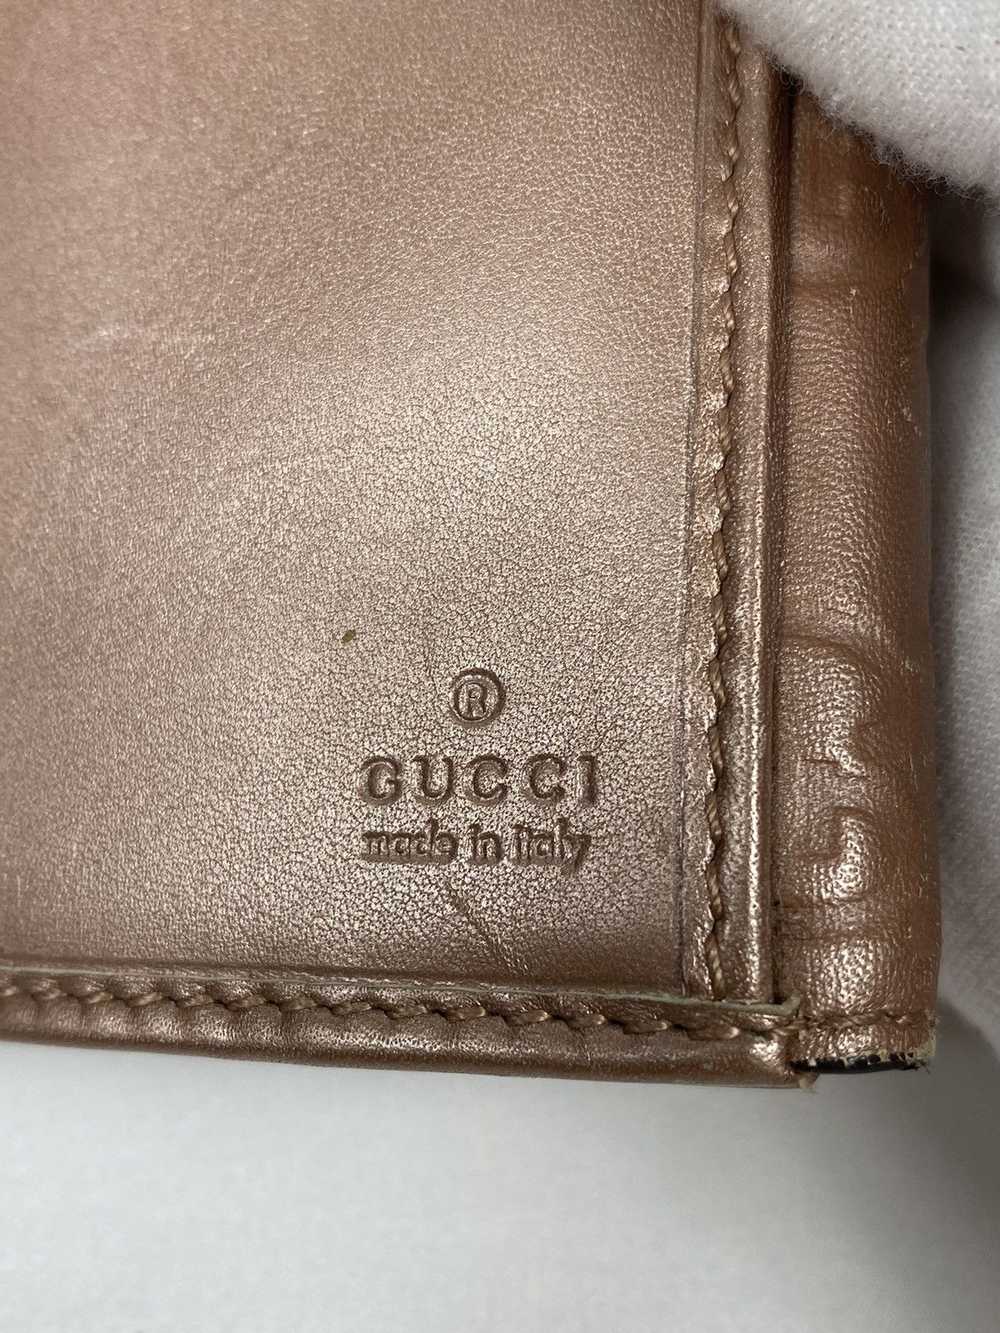 Gucci Gucci GG Guccissima leather long wallet - image 5